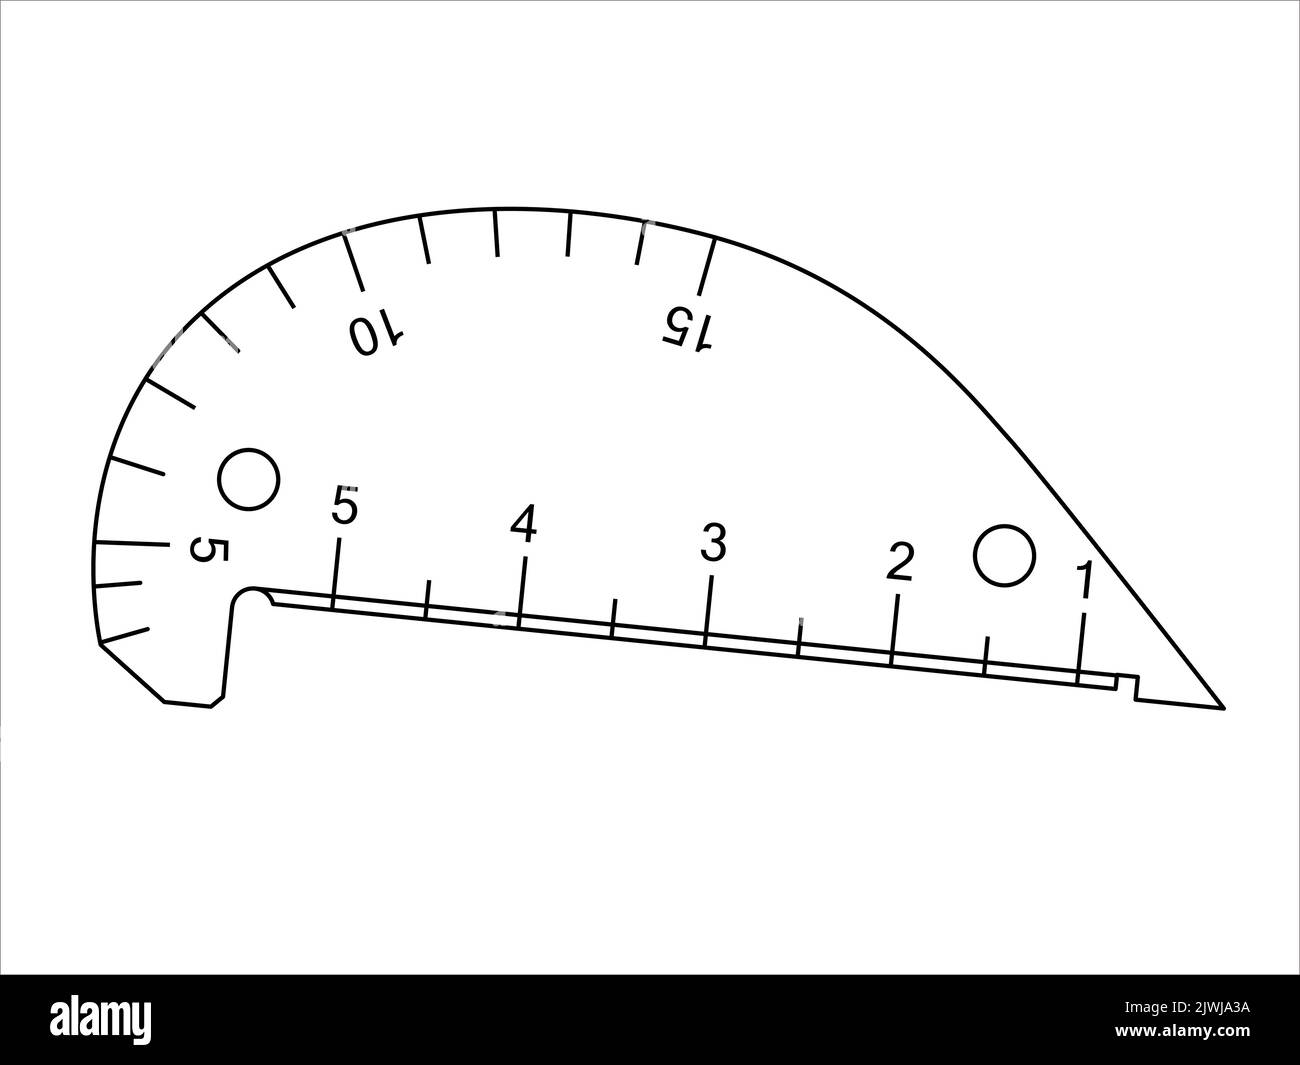 Krasovsky. Measuring tool and instrument for high-precision measurements for industry  and business. Vector illustration isolated on white background. Stock Vector